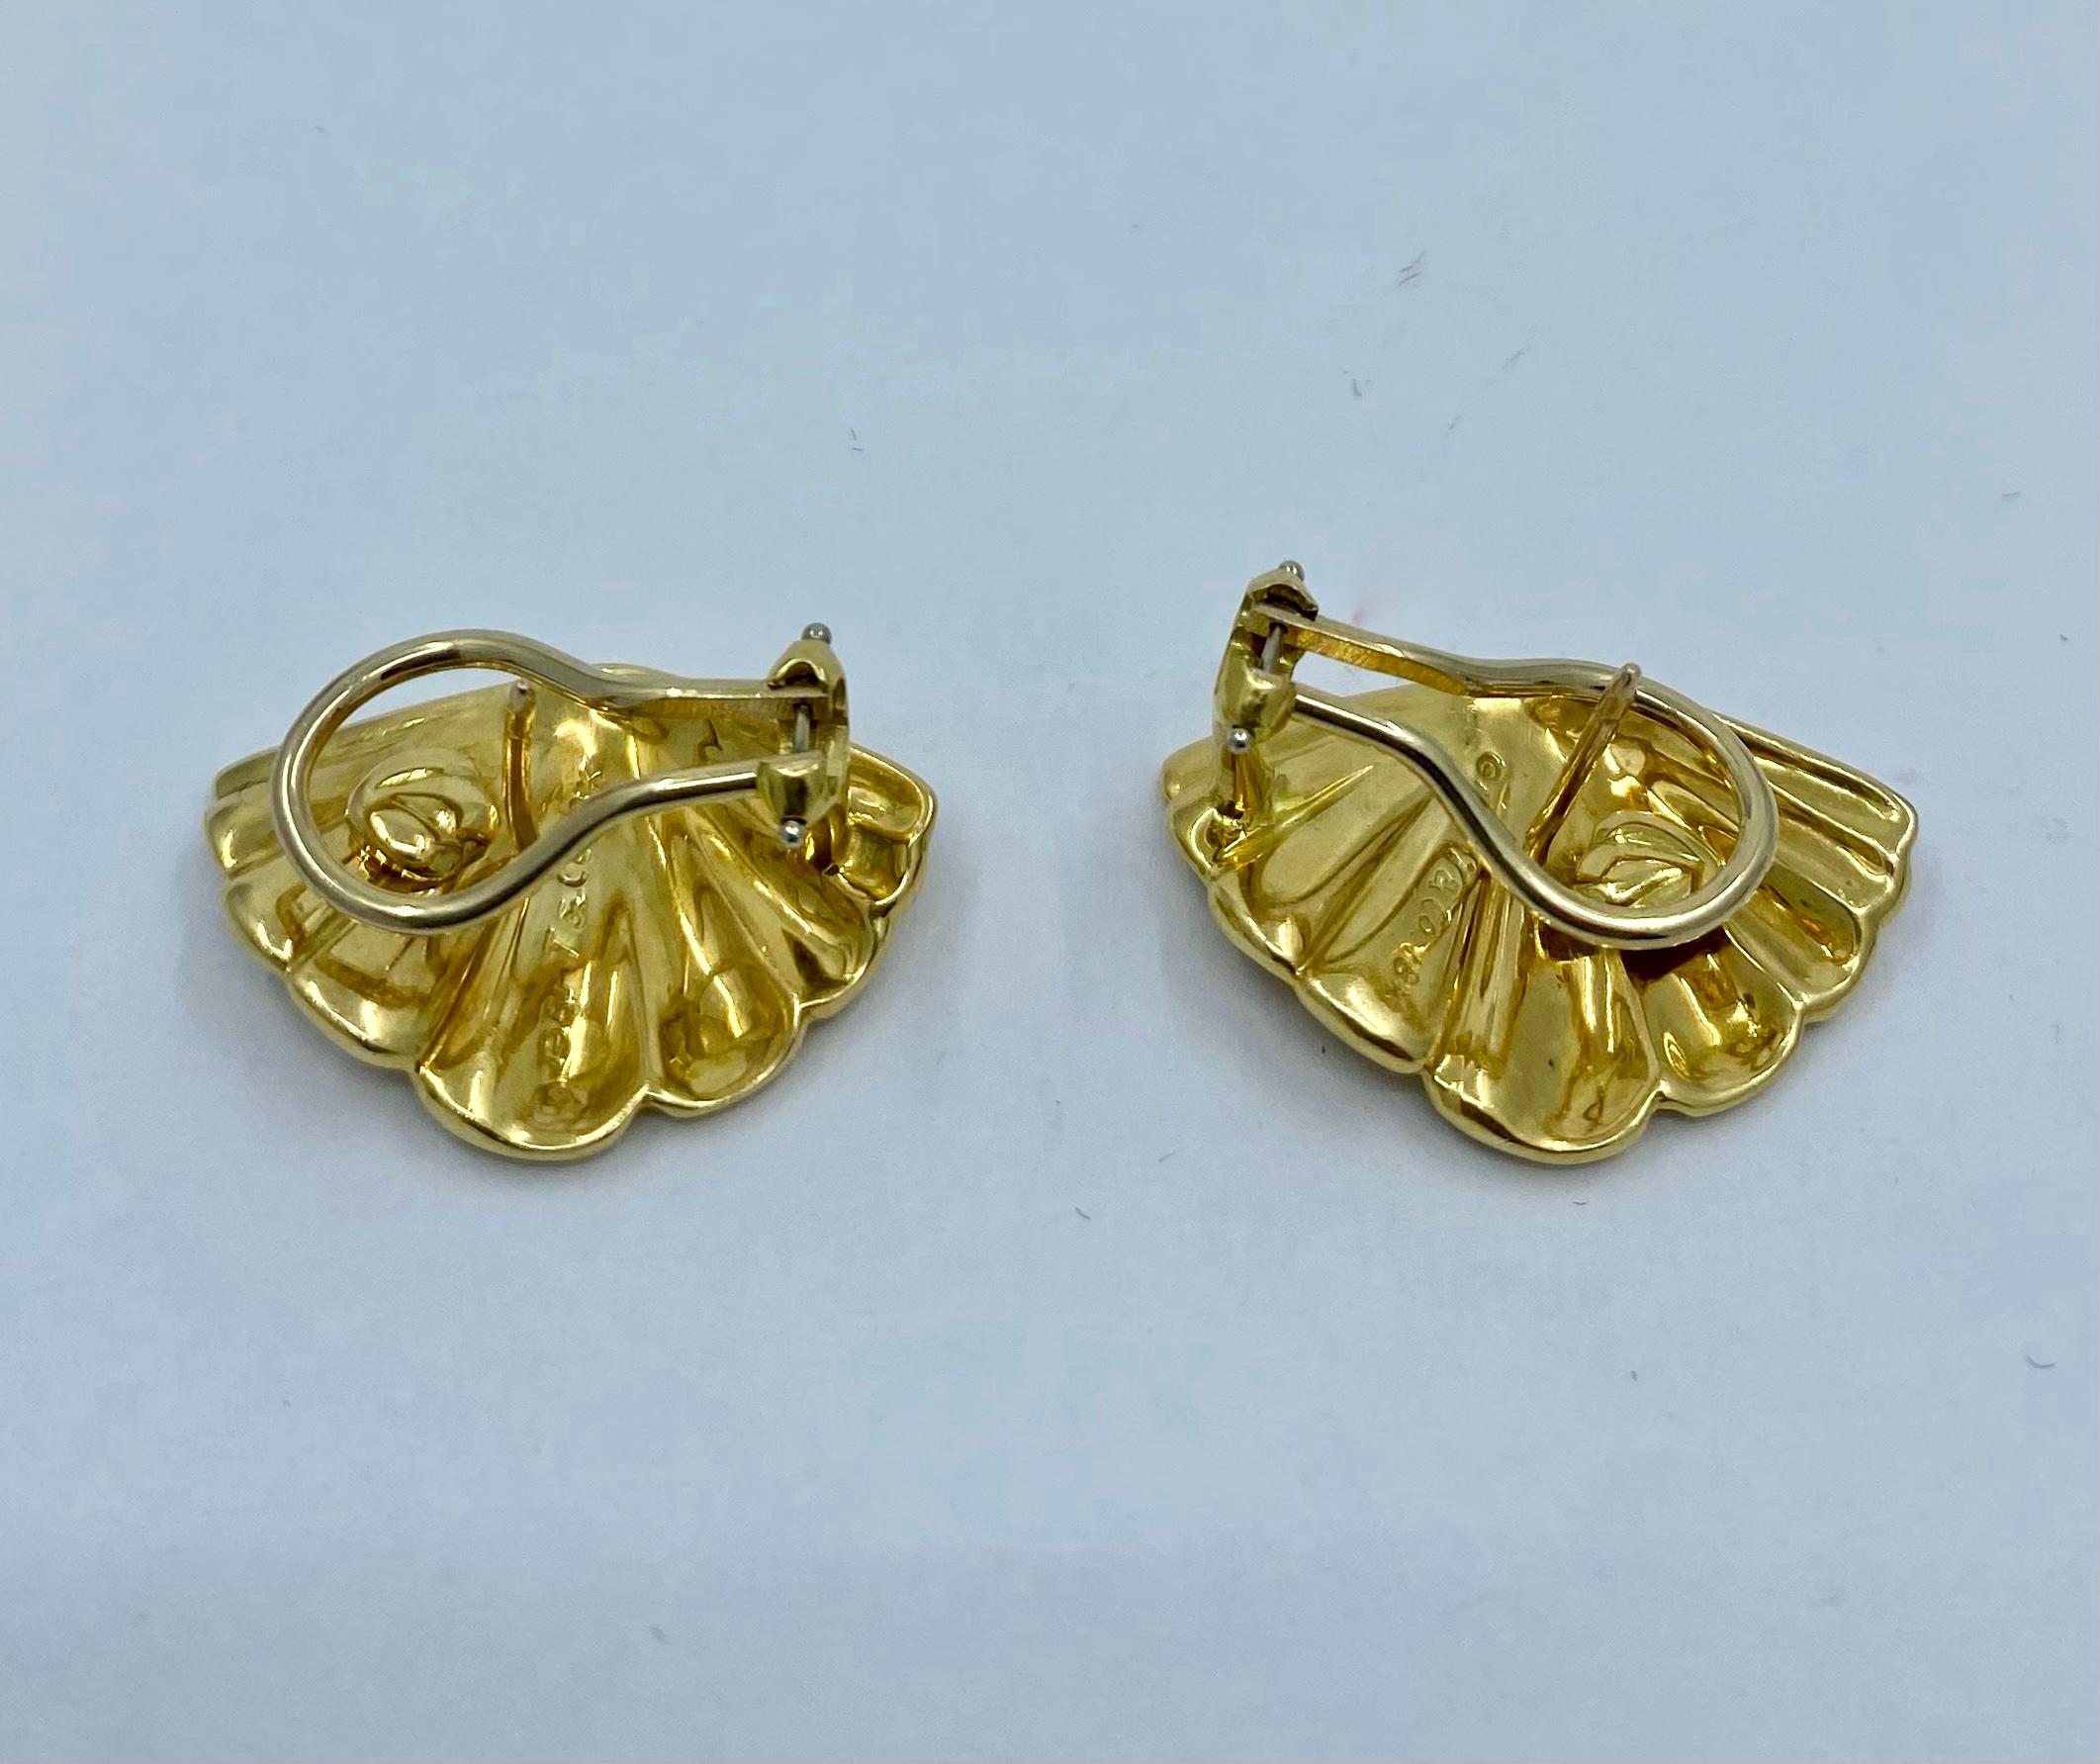 Designer: Tiffany & Co. 
Materials: 18K Yellow Gold
Weight: 13.7 grams
Measurement: 1 inches long and 5/8 inches wide
Hallmarks: 1981 T & Co. 18K

A pair of Tiffany & Co. 18k gold scallop shell earrings.
Tiffany has been applied a seashell motif for